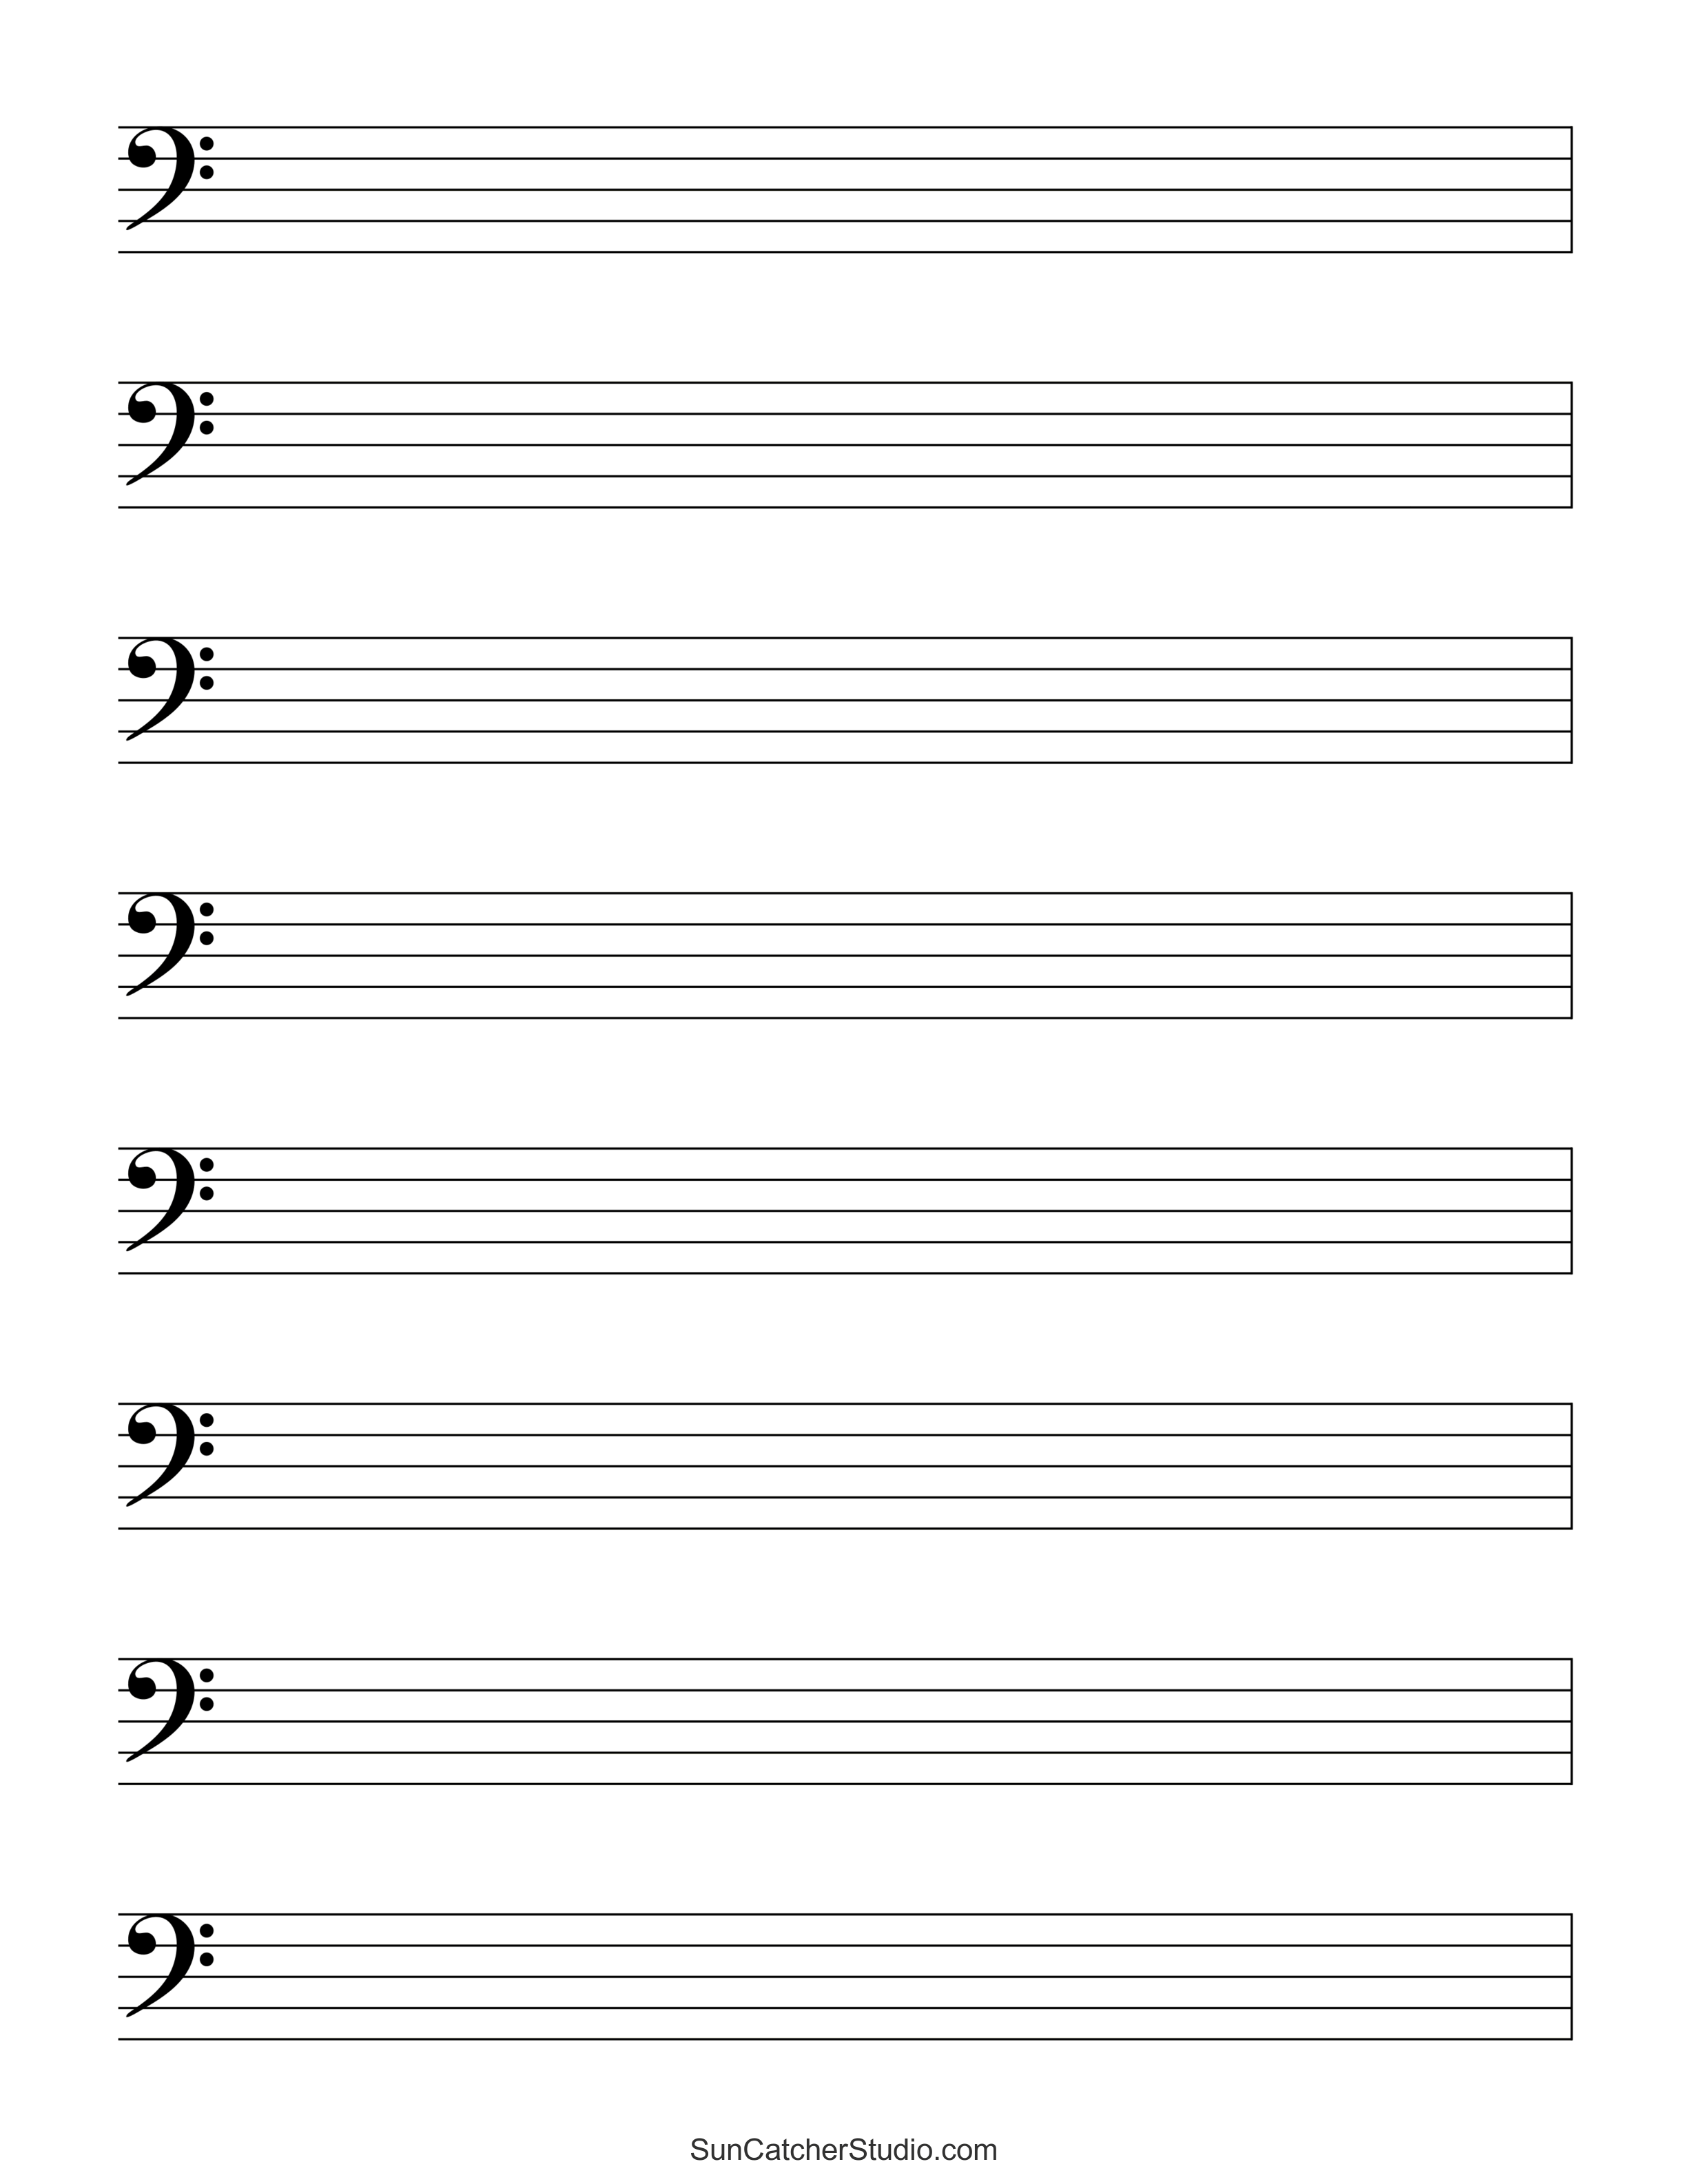 Blank Sheet Music Free Printable Staff Paper Diy Projects Patterns Monograms Designs 2737